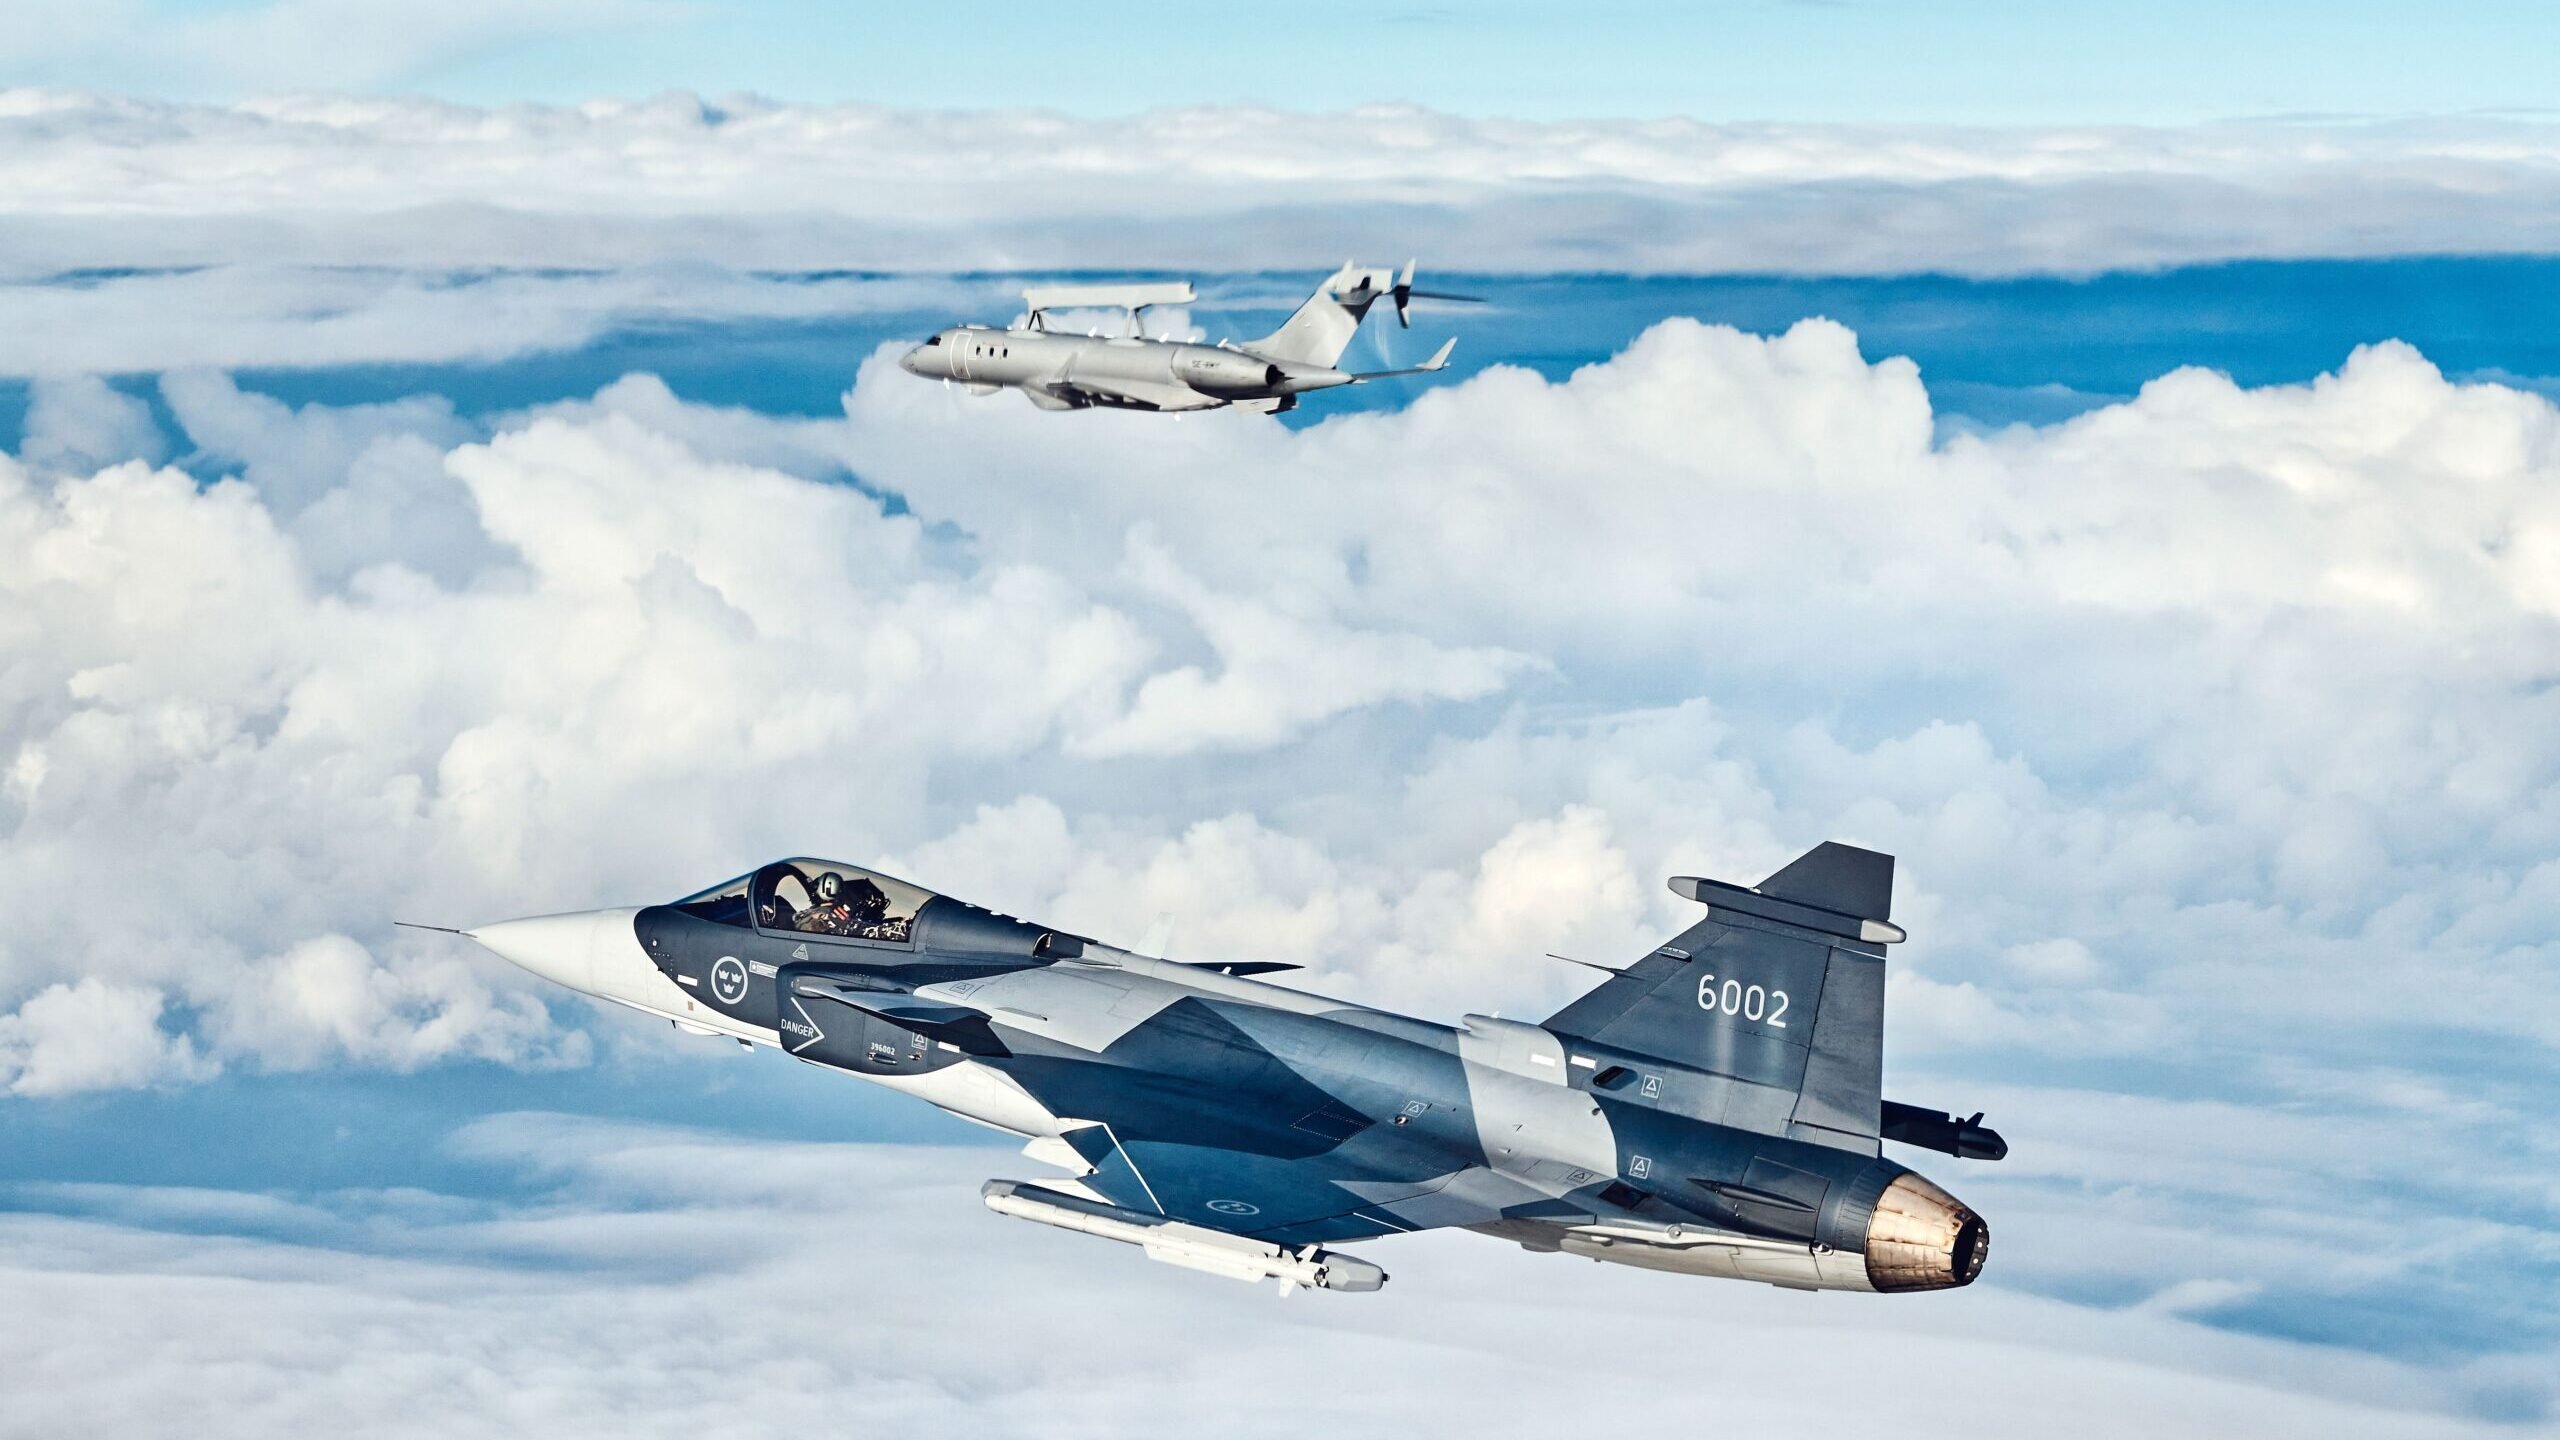 Saab looks for M&A opportunities abroad, hopes Sweden’s NATO entry boosts GlobalEye chances